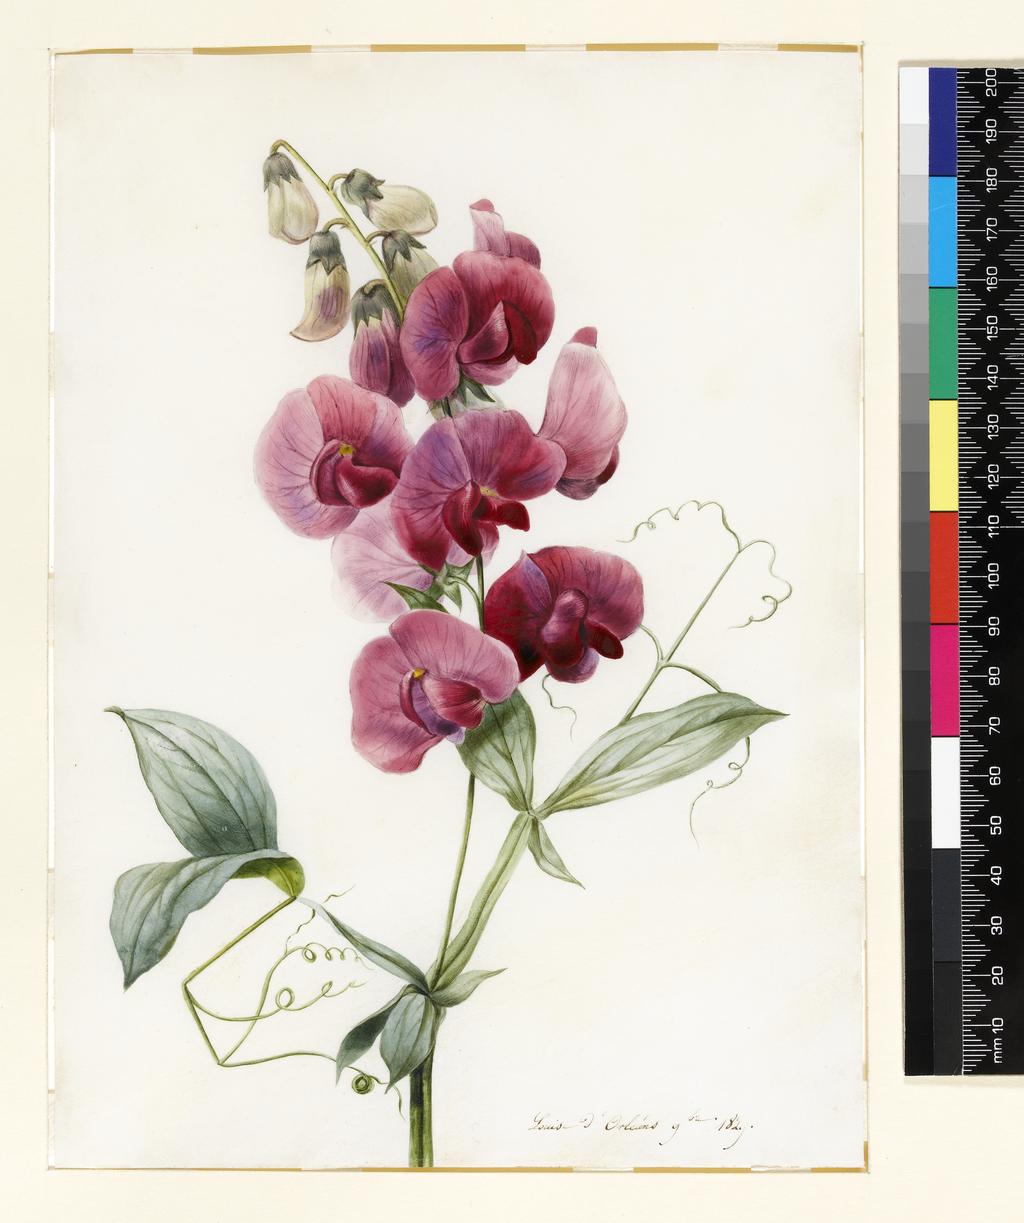 An image of Lathyrus Latifolius (Everlasting Pea). Louise d'Orleans (French, 1812-185?). Watercolour with some bodycolour on vellum. Height: 226 mm, width: 165 mm. 1829.